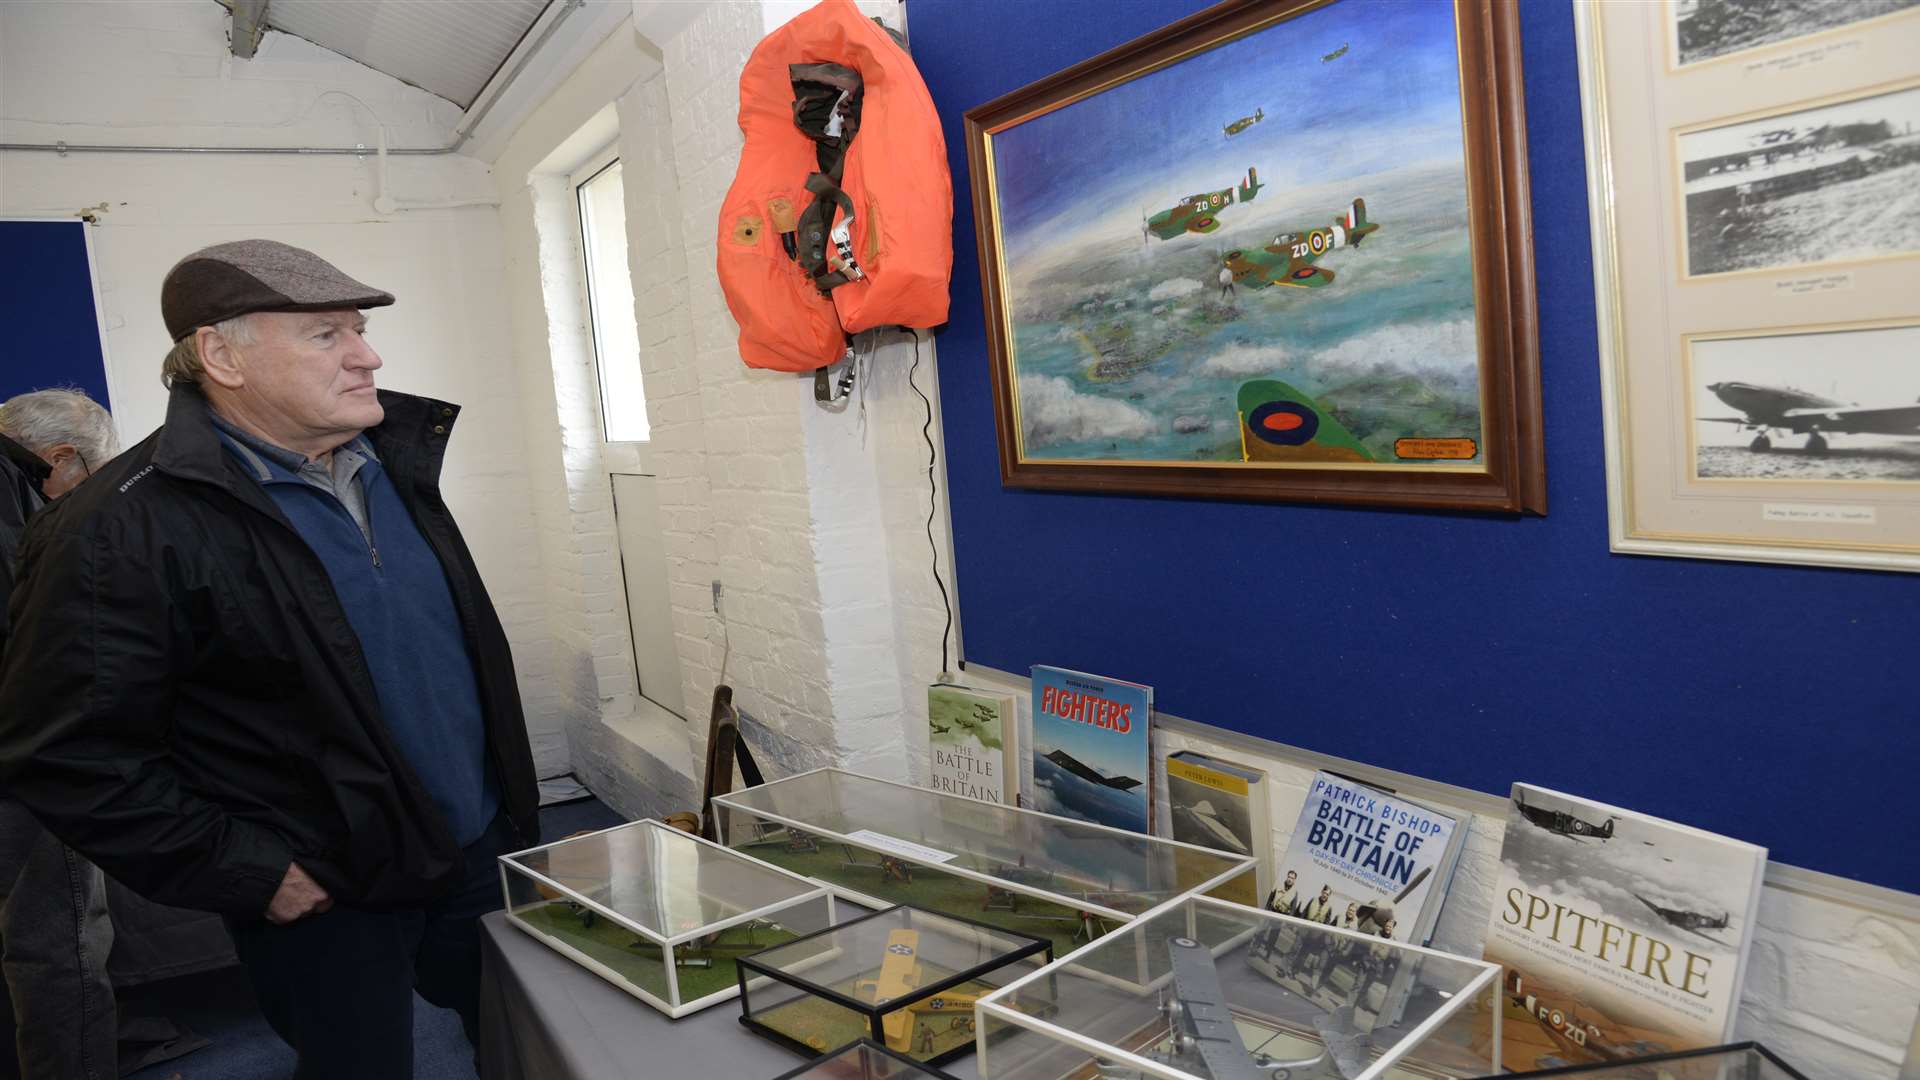 Len Curtis takes a look at one of the displays at the aviation annex at Eastchurch